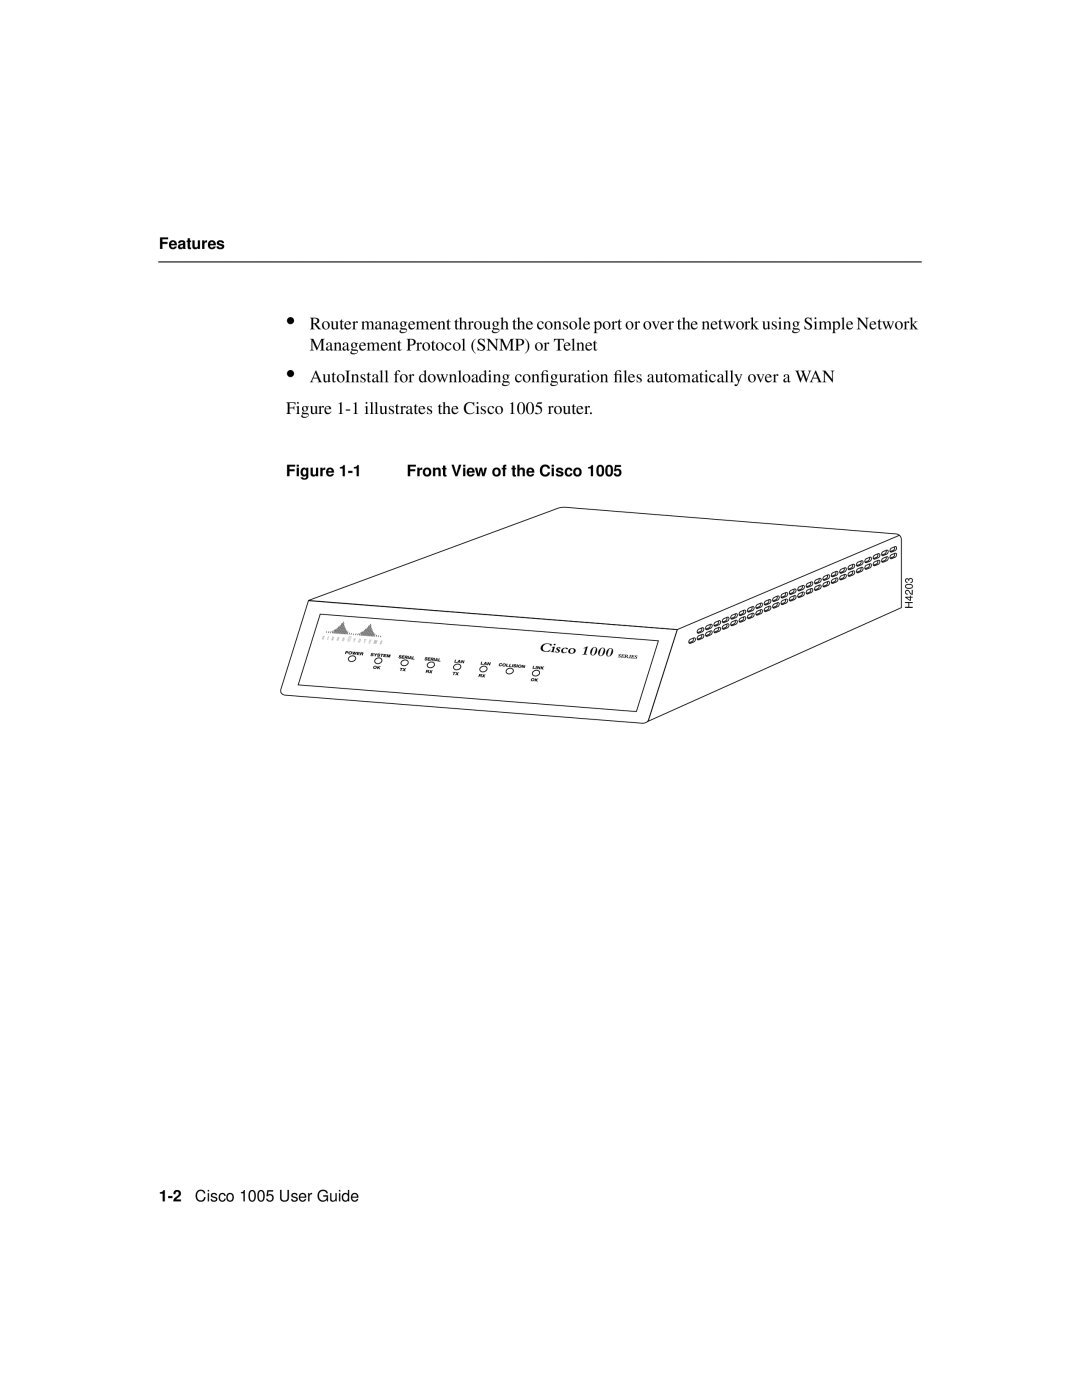 Cisco Systems 1 illustrates the Cisco 1005 router, Features, 1 Front View of the Cisco, Cisco 1005 User Guide, H4203 